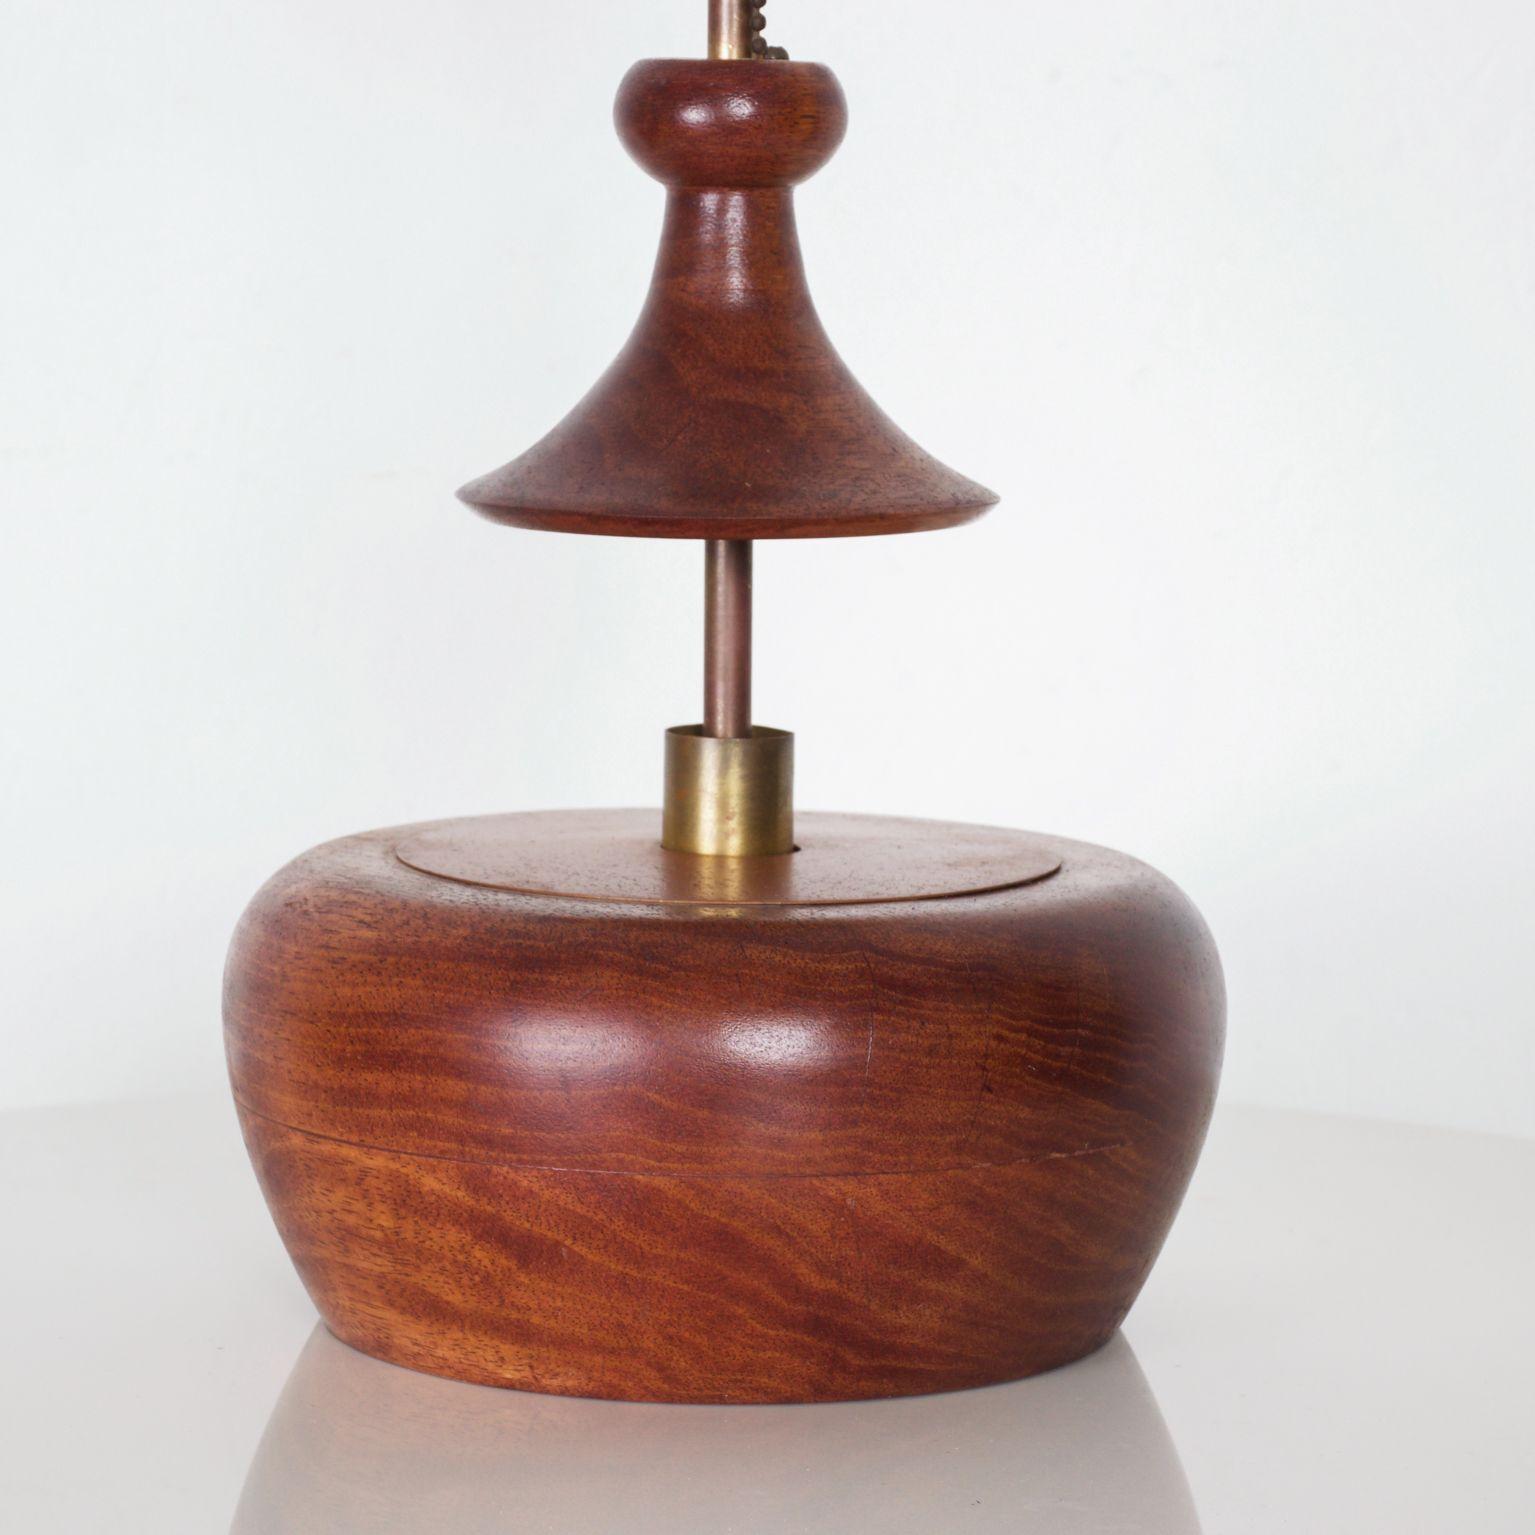 For your pleasure: Mid-Century Modern Walnut Wood with Brass table lamp in sculptural form 

In the style of Tony Paul for Westwood Industries 1950s

Dimensions: 15 1/2